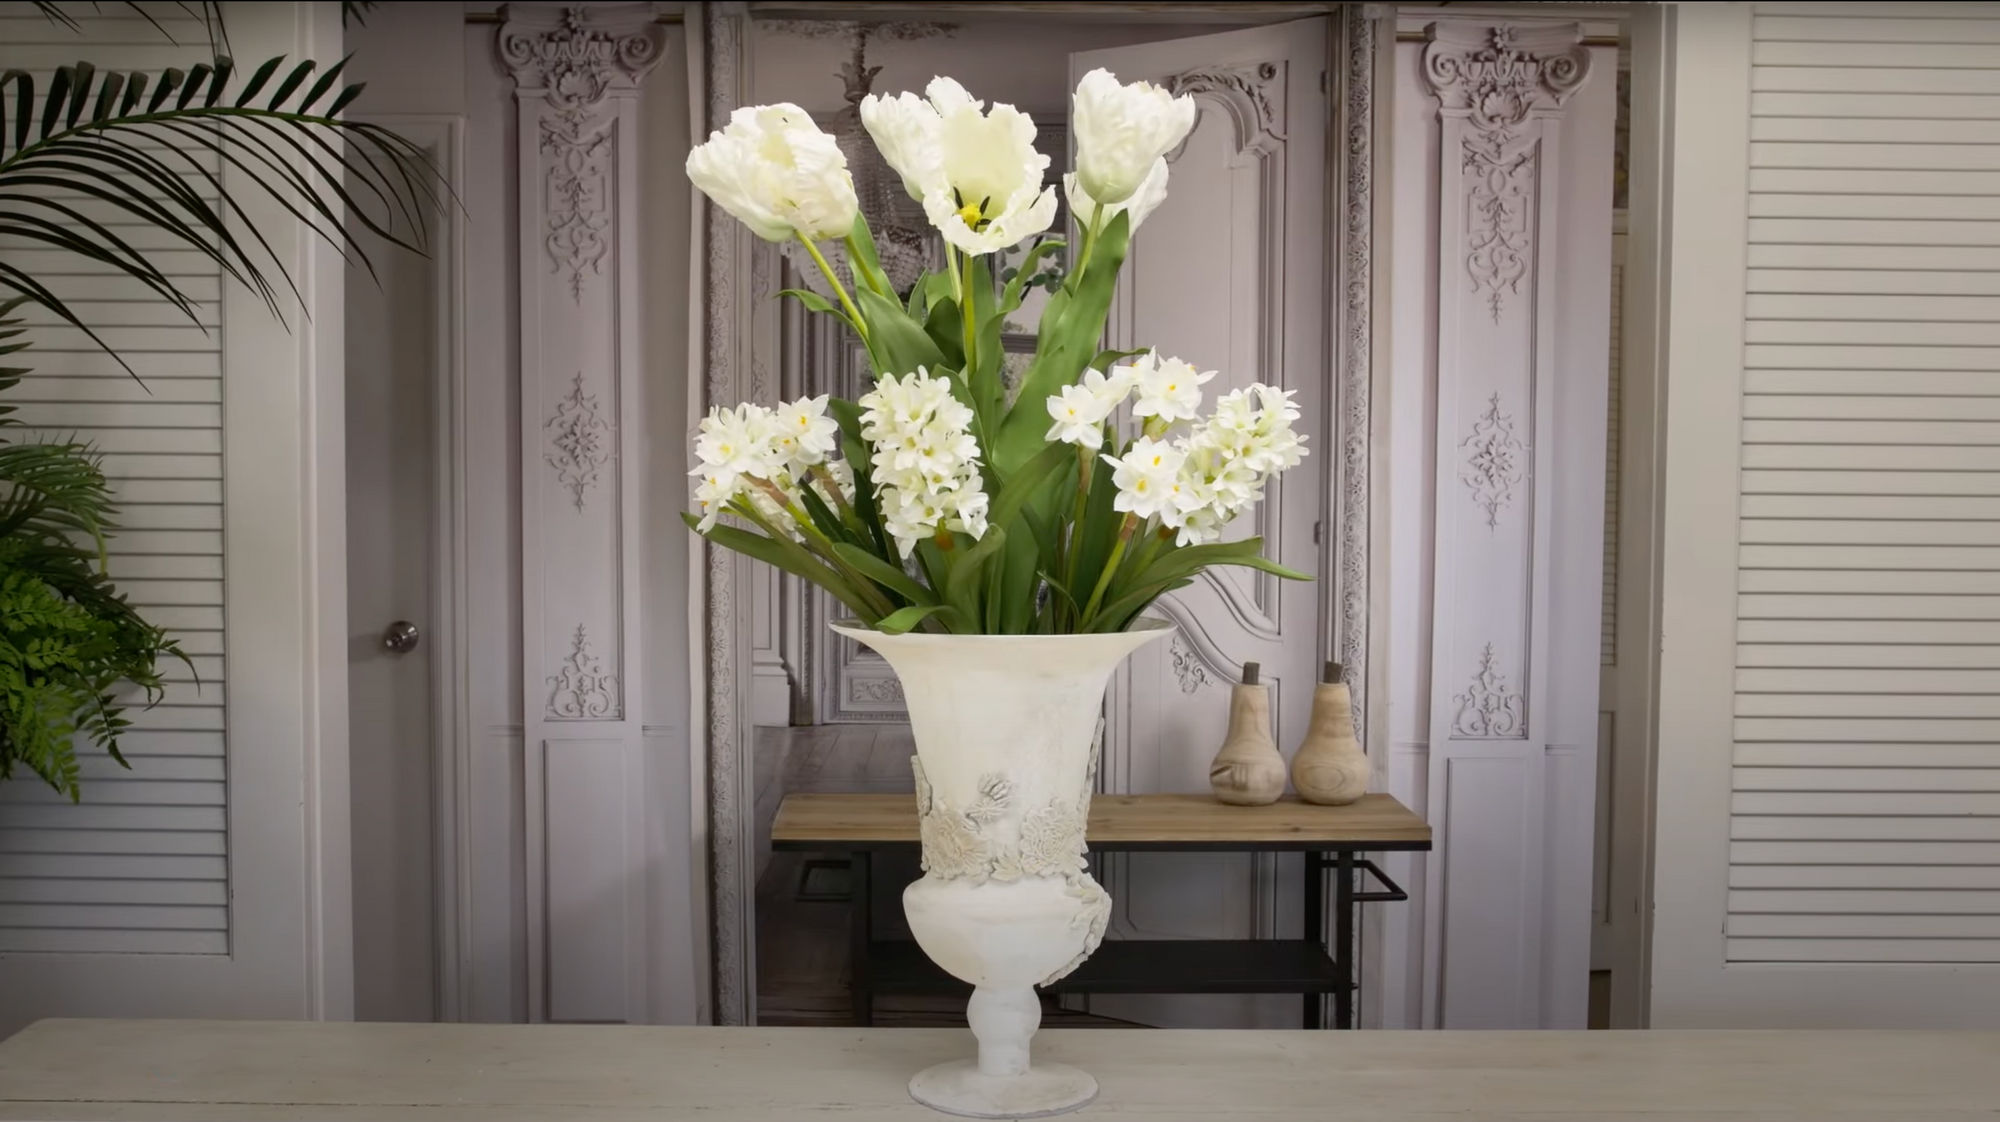 A SPRING Design with White Tulips, Hyacinths & Narcissus